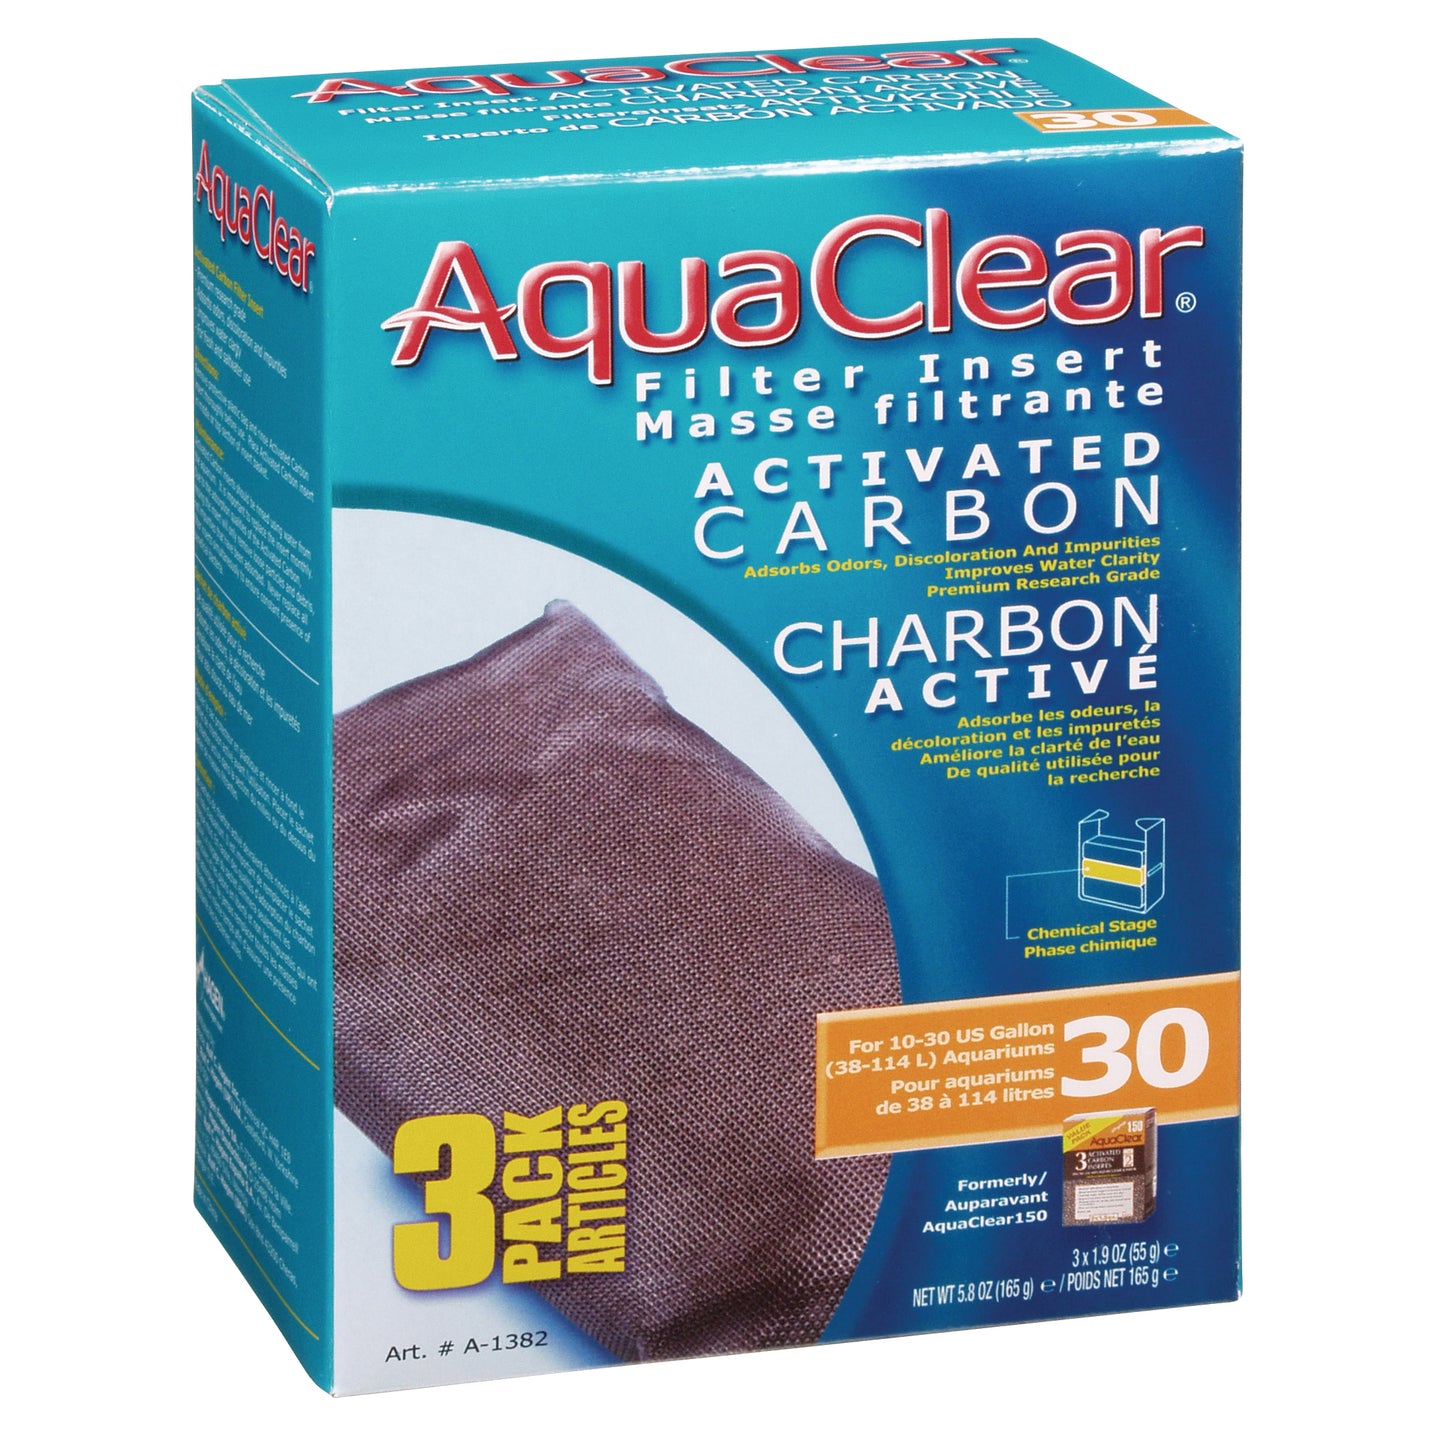 AquaClear Activated Carbon Filter 3 Pack